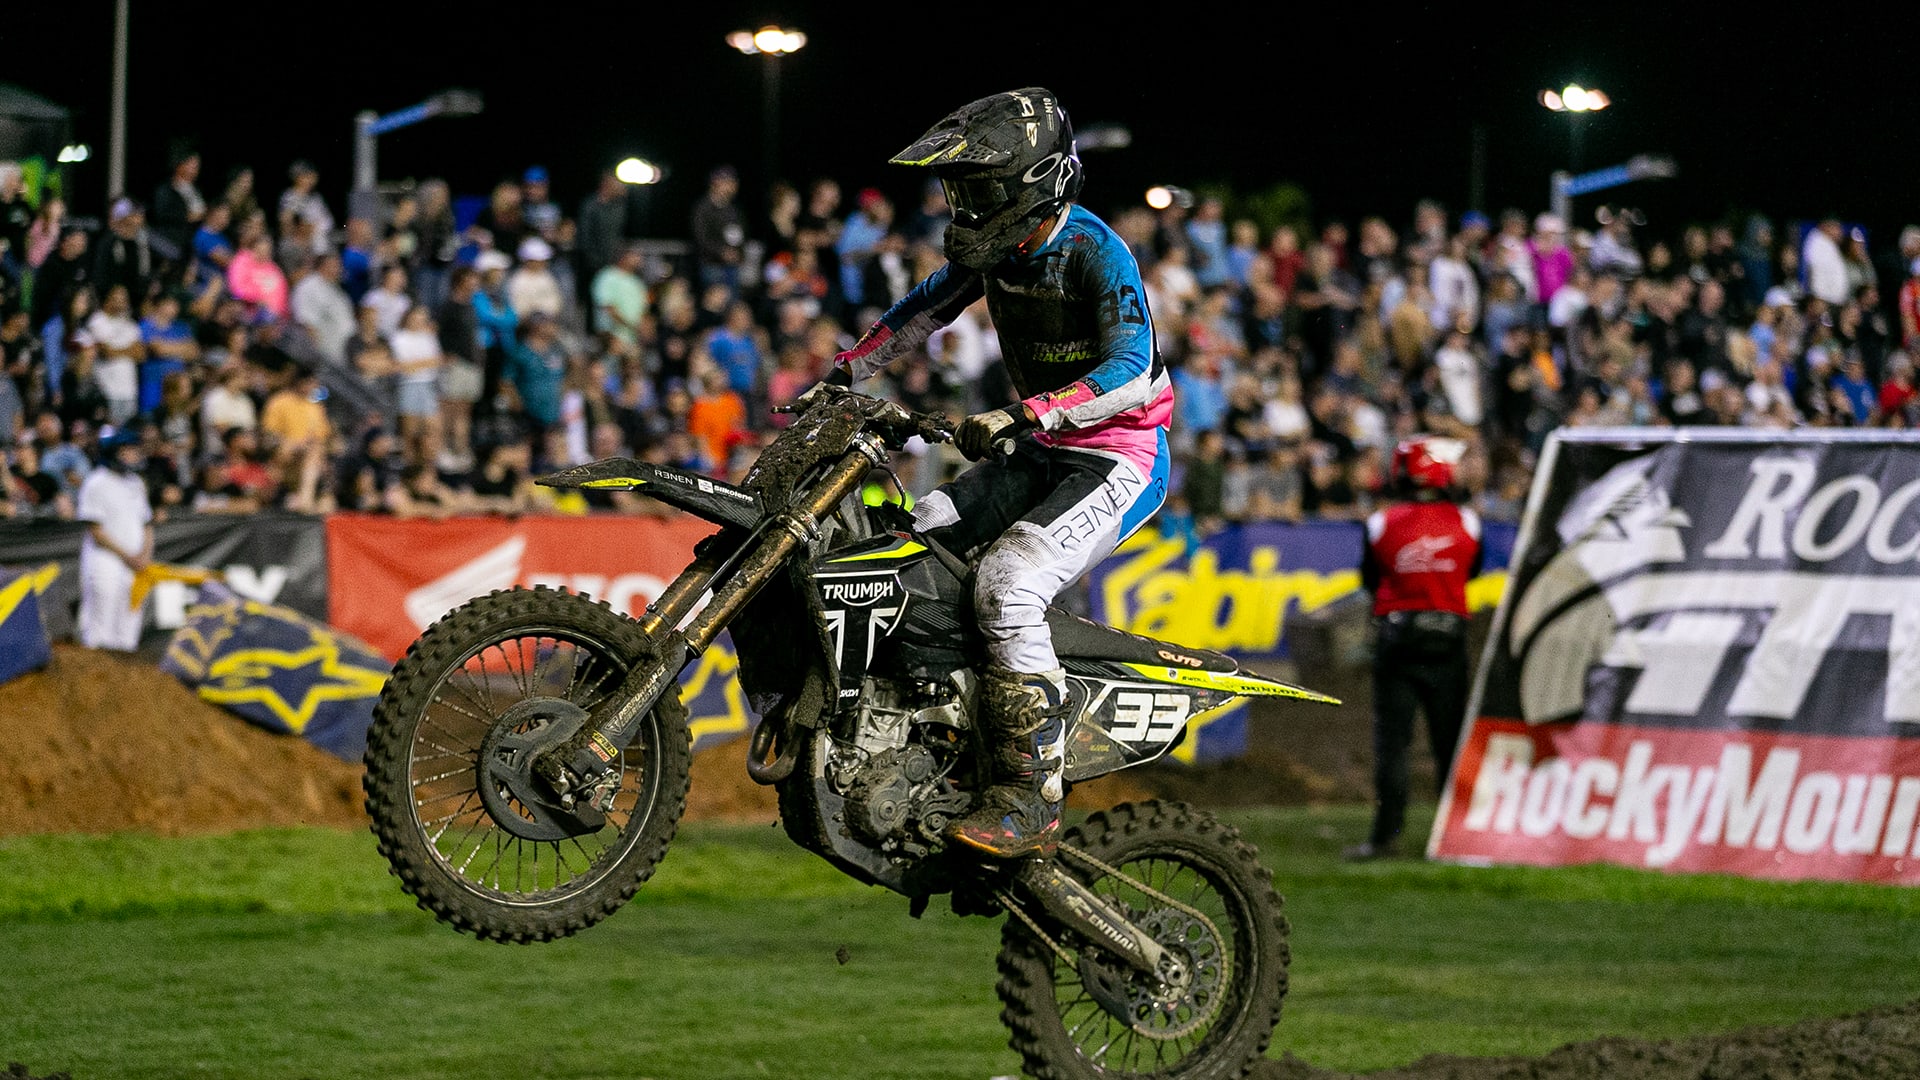 Jalek Swoll at the third round of the Monster Energy AMA 250SX East championship held in Daytona